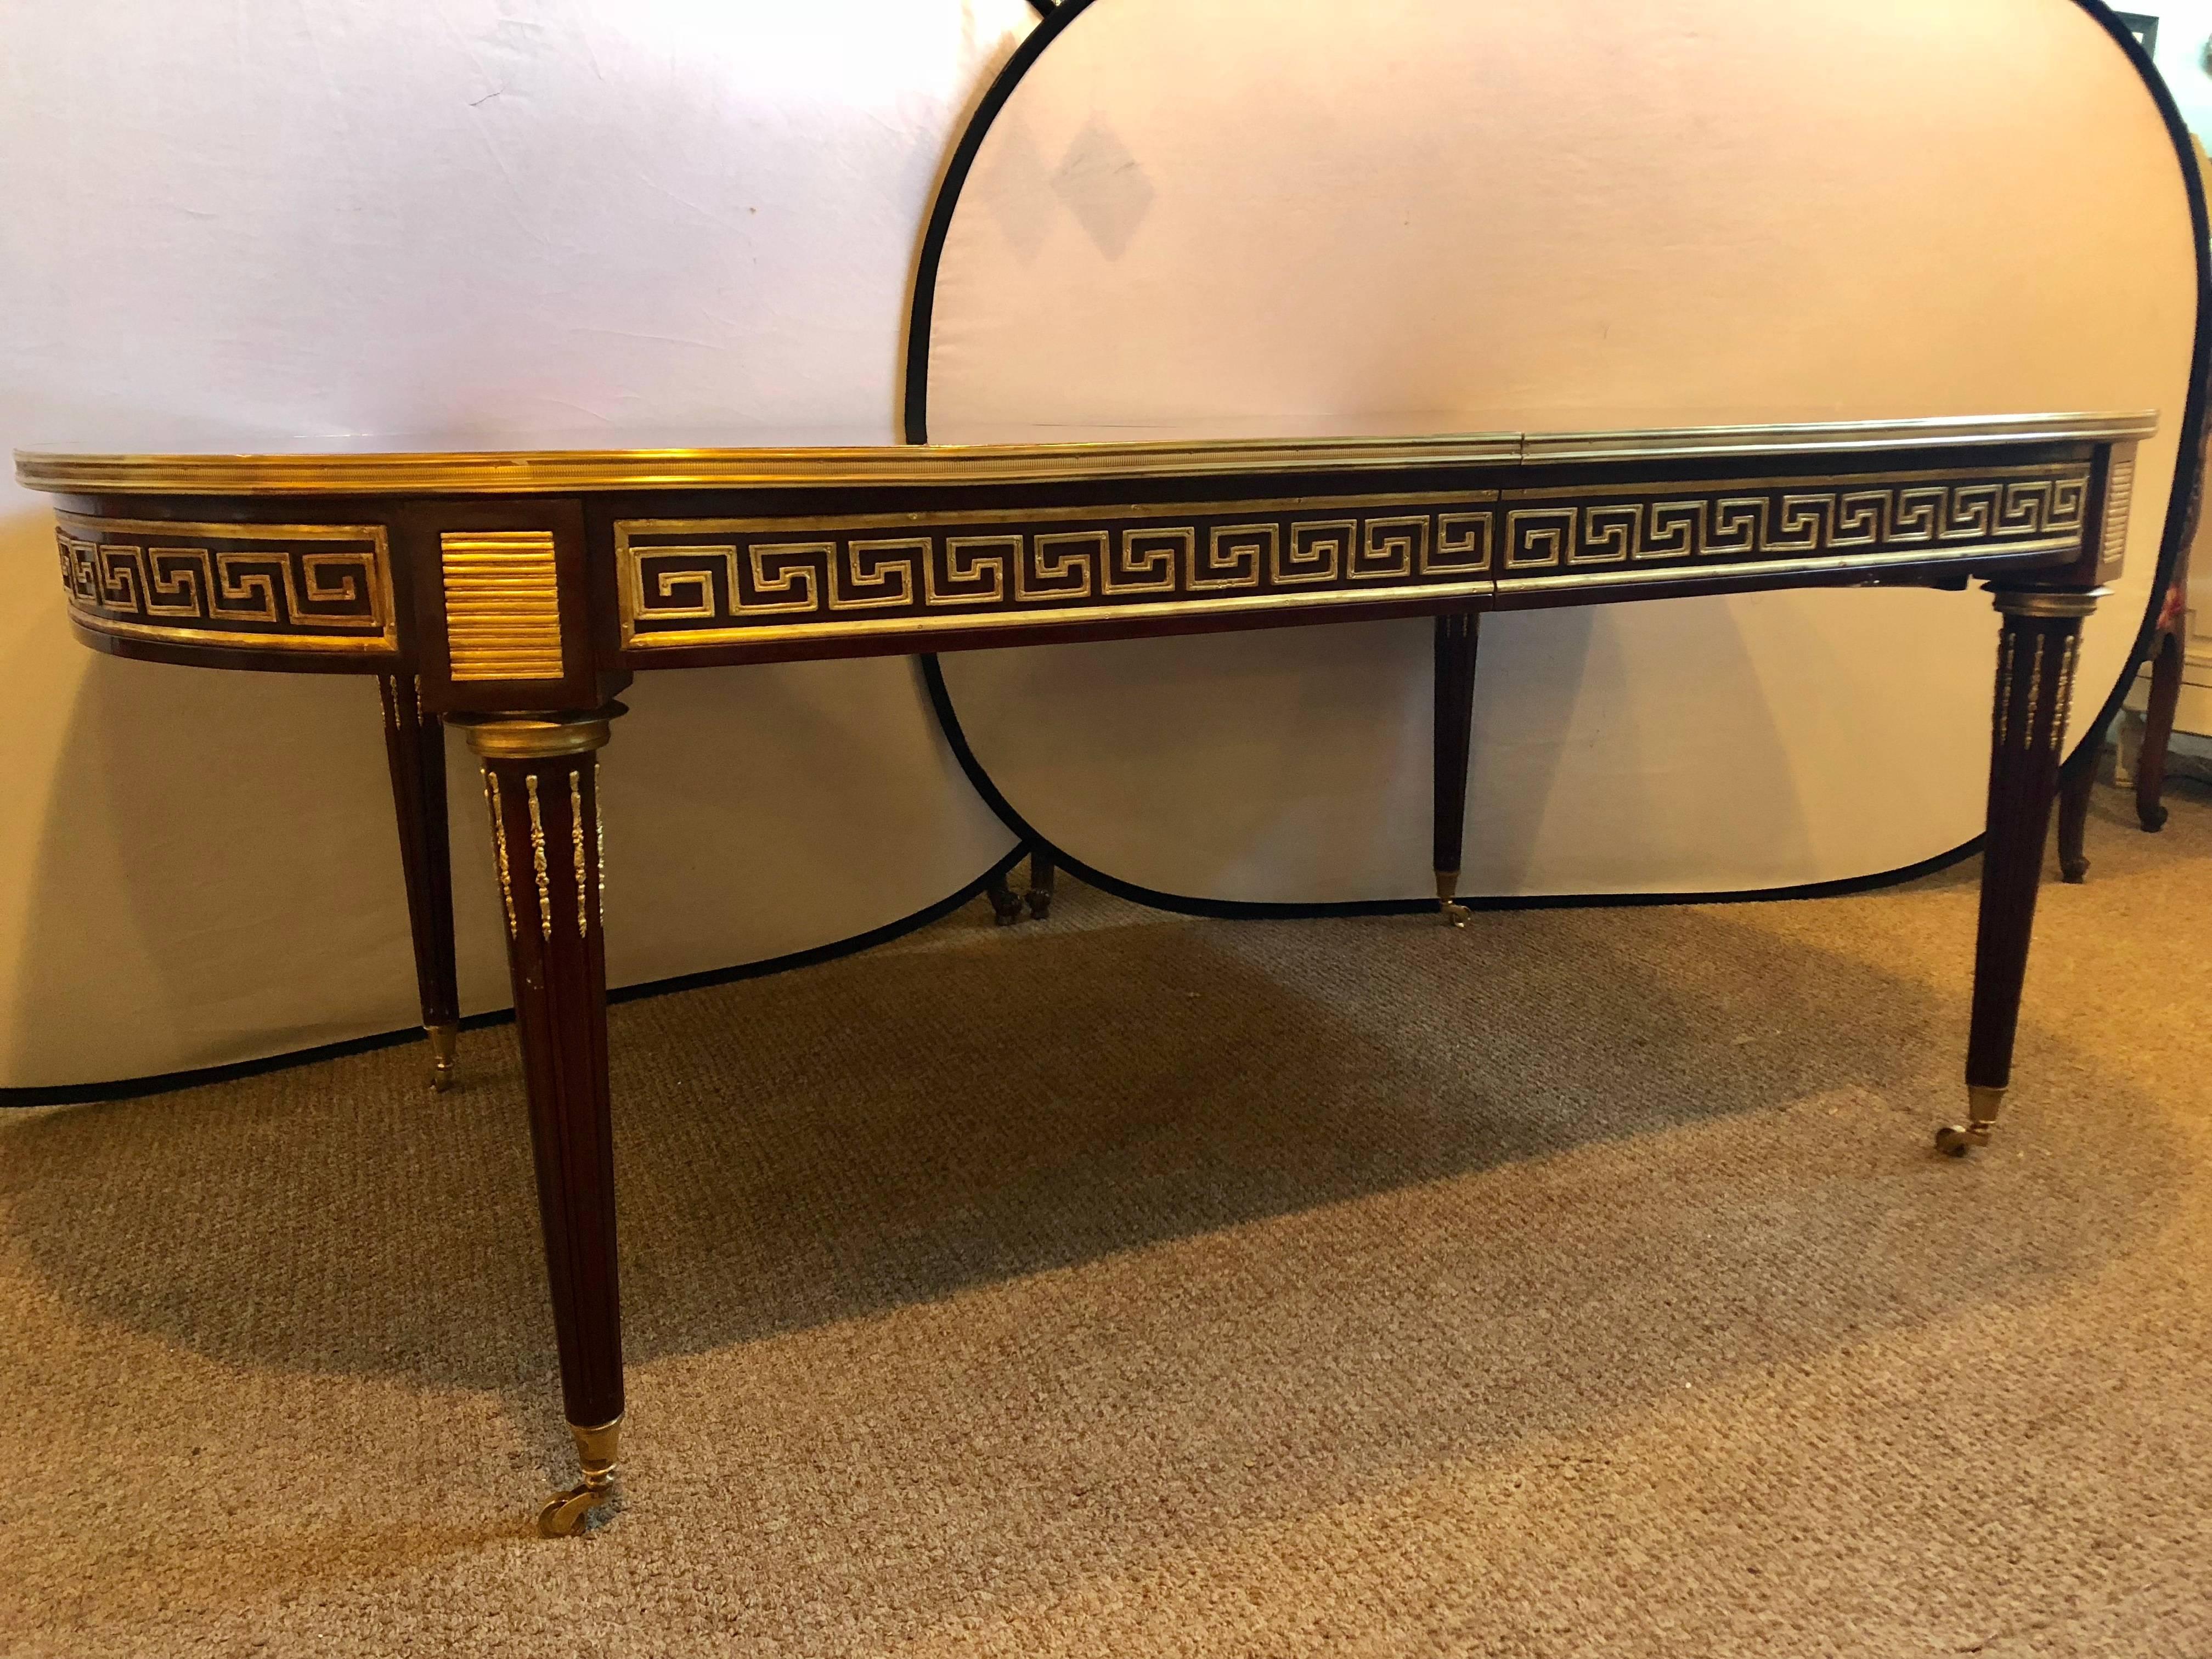 Hollywood Regency at its finest in this one of a kind Maison Jansen inspired 12 foot bronze-mounted Greek key design dining room table each of the three bronze-mounted leaves measure 19.5 inches. This table at almost four feet wide and 84 inches